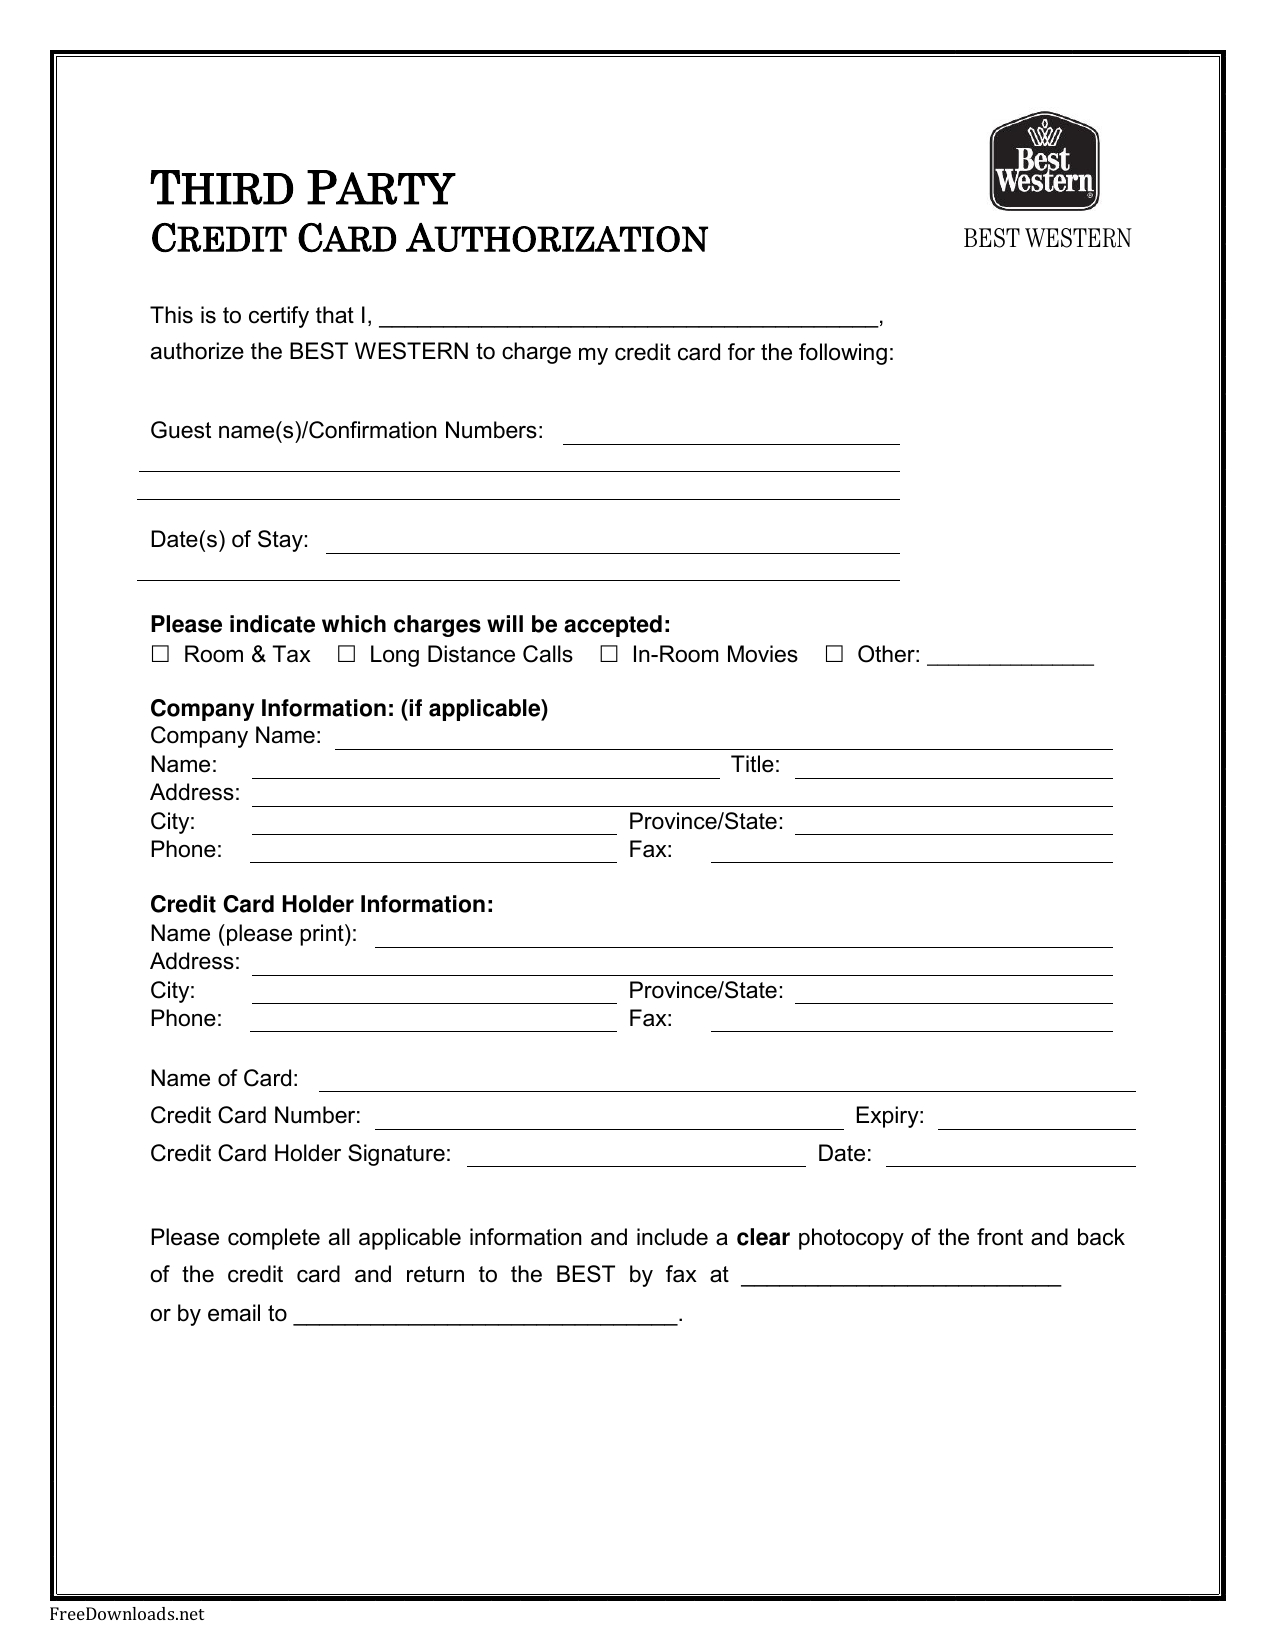 Authorization Form Templates - Dalep.midnightpig.co With Regard To Hotel Credit Card Authorization Form Template